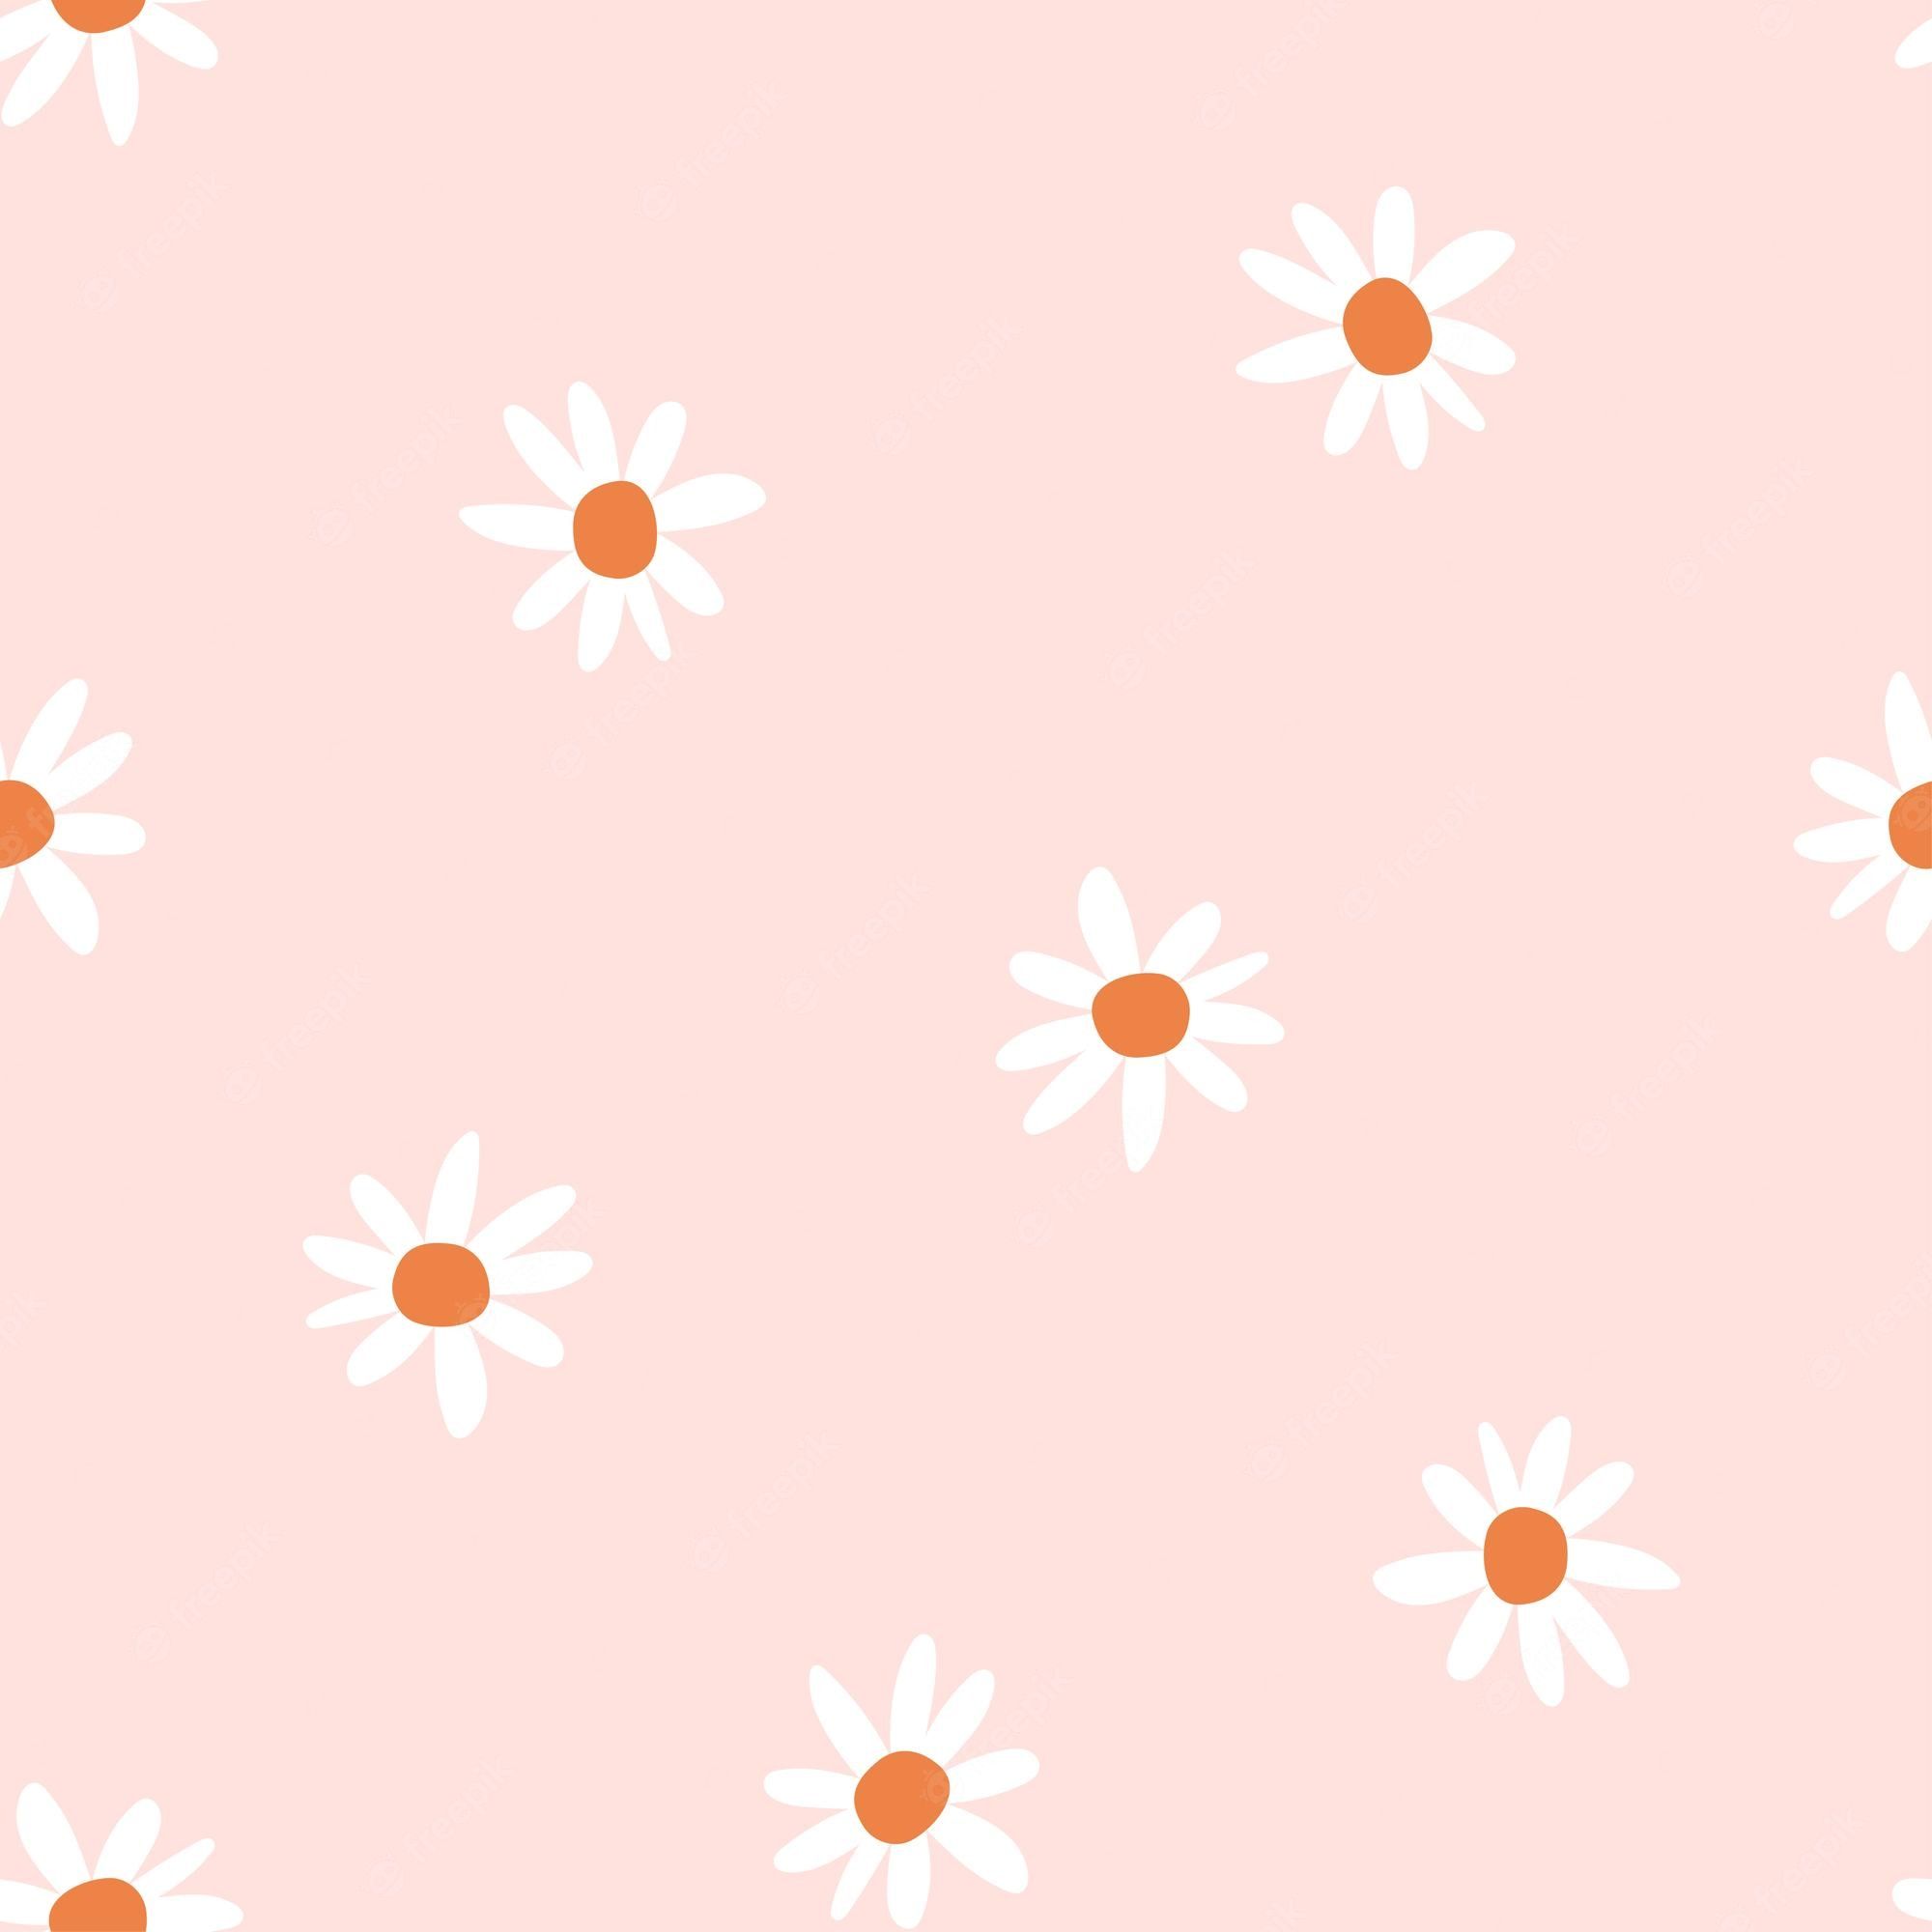 A pink background with white daisies - Pattern, retro, design